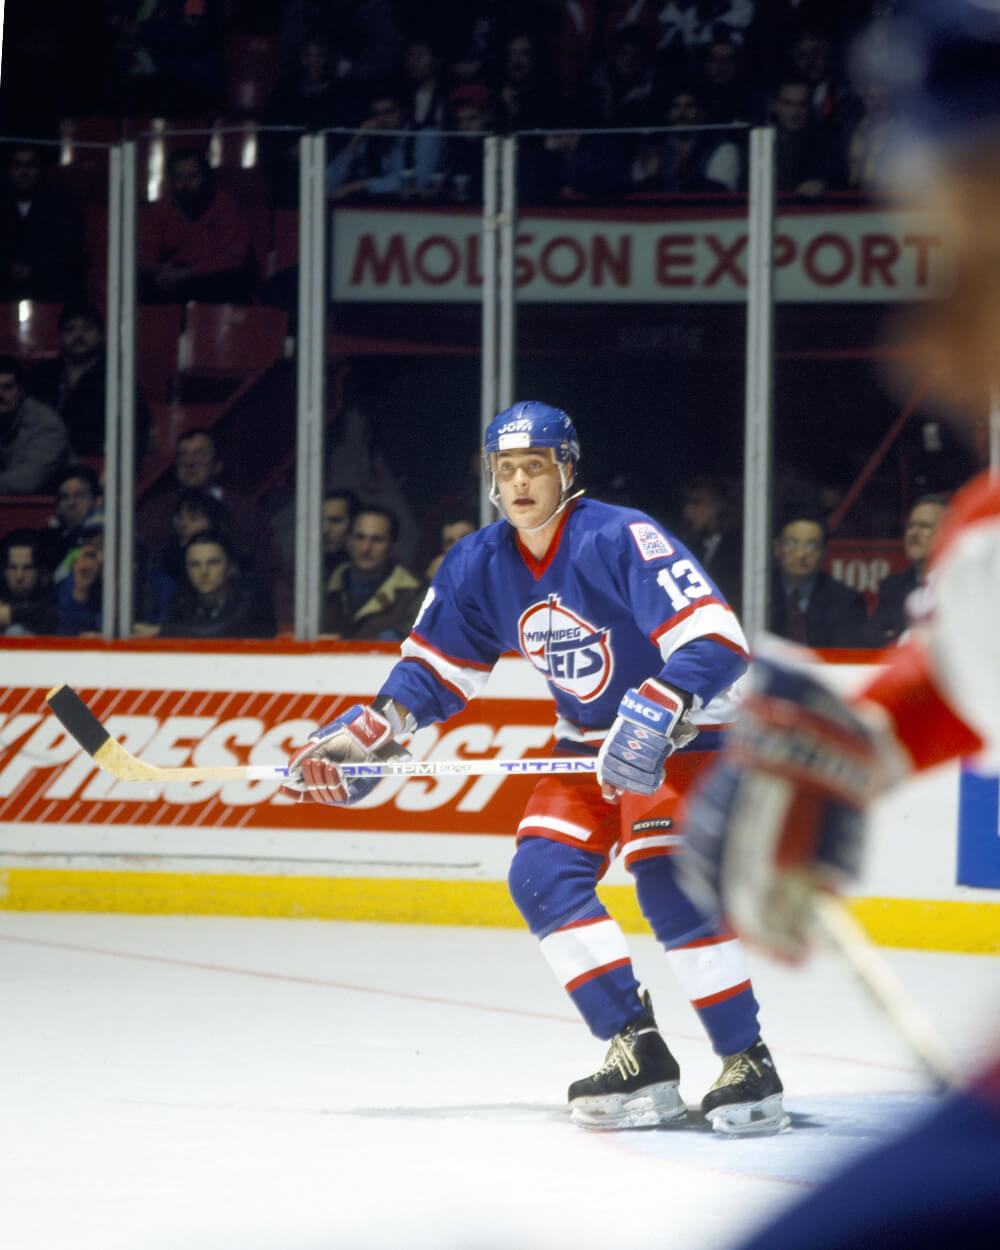 NHL99: Teemu Selanne's record-setting rookie season was all flash … and  substance - The Athletic